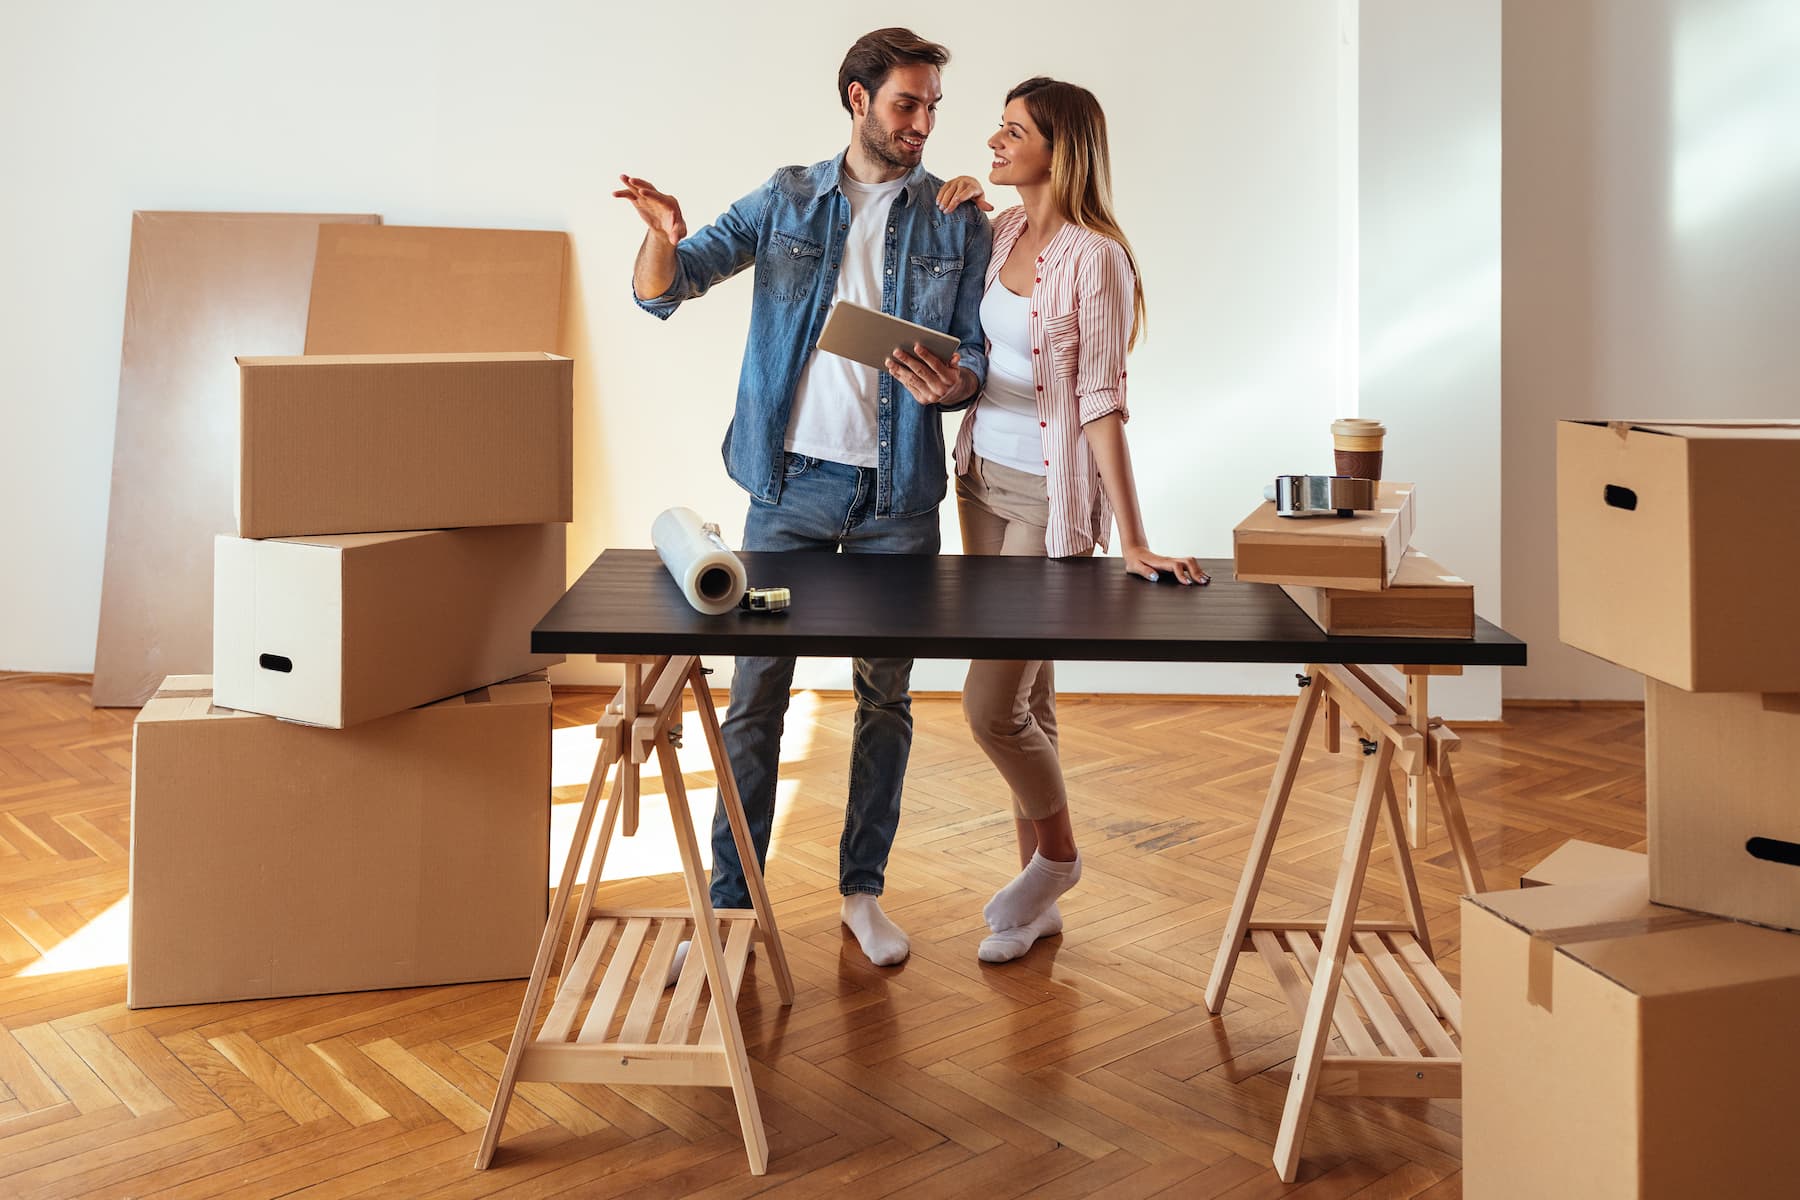 Expert Tips Building Your Dream Home: 5 Insights from Sydney's Top Real Estate Agents